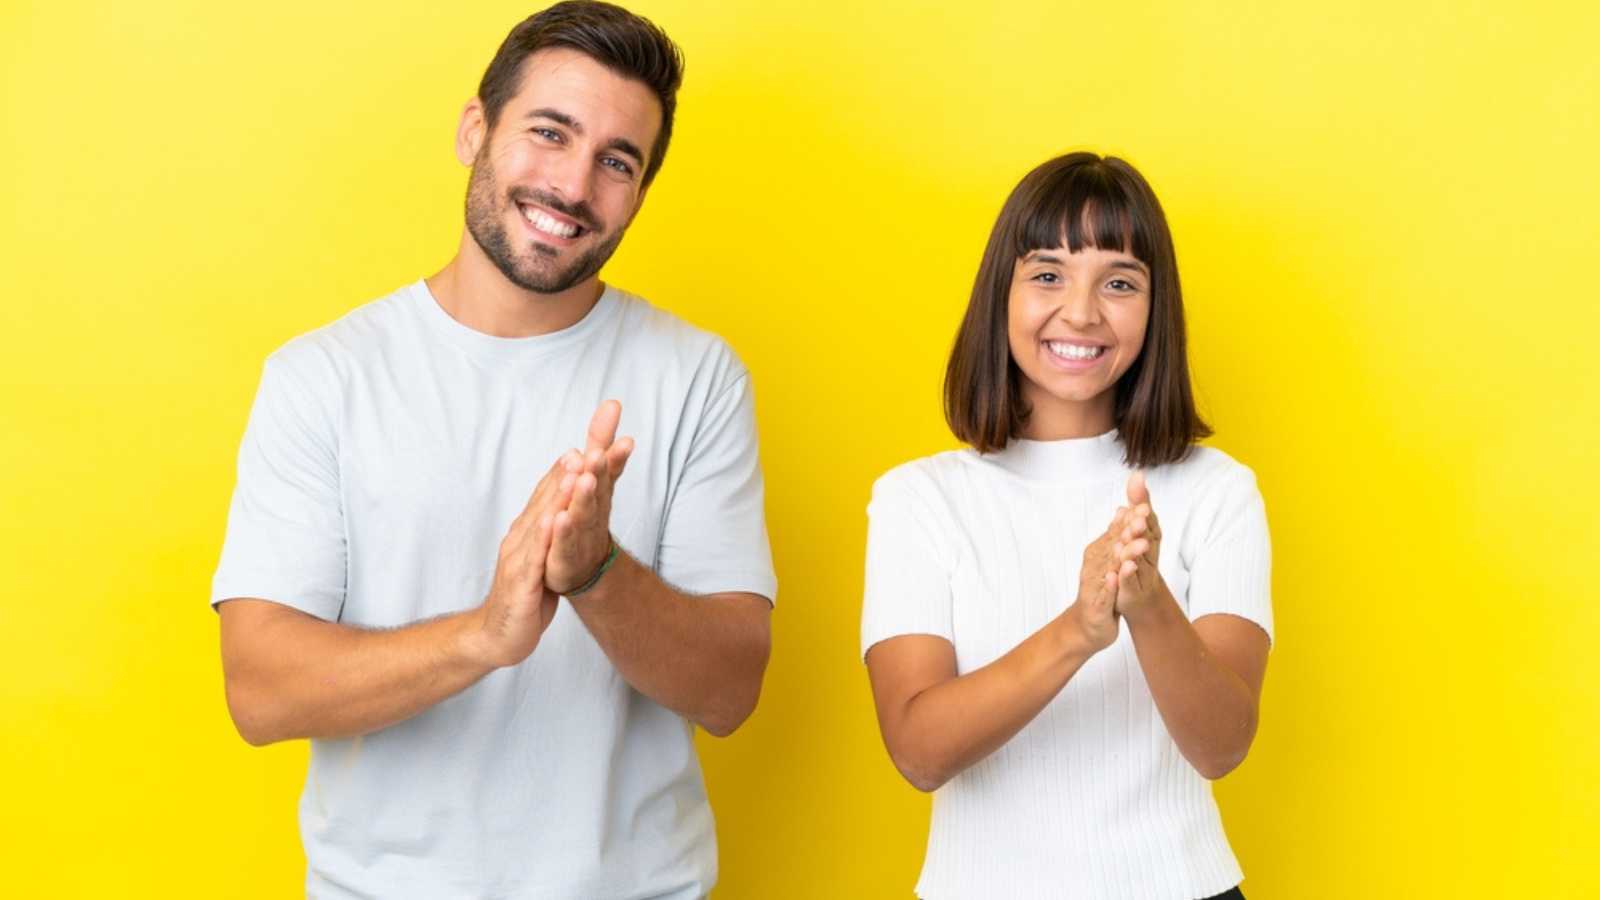 Man And Woman Clapping